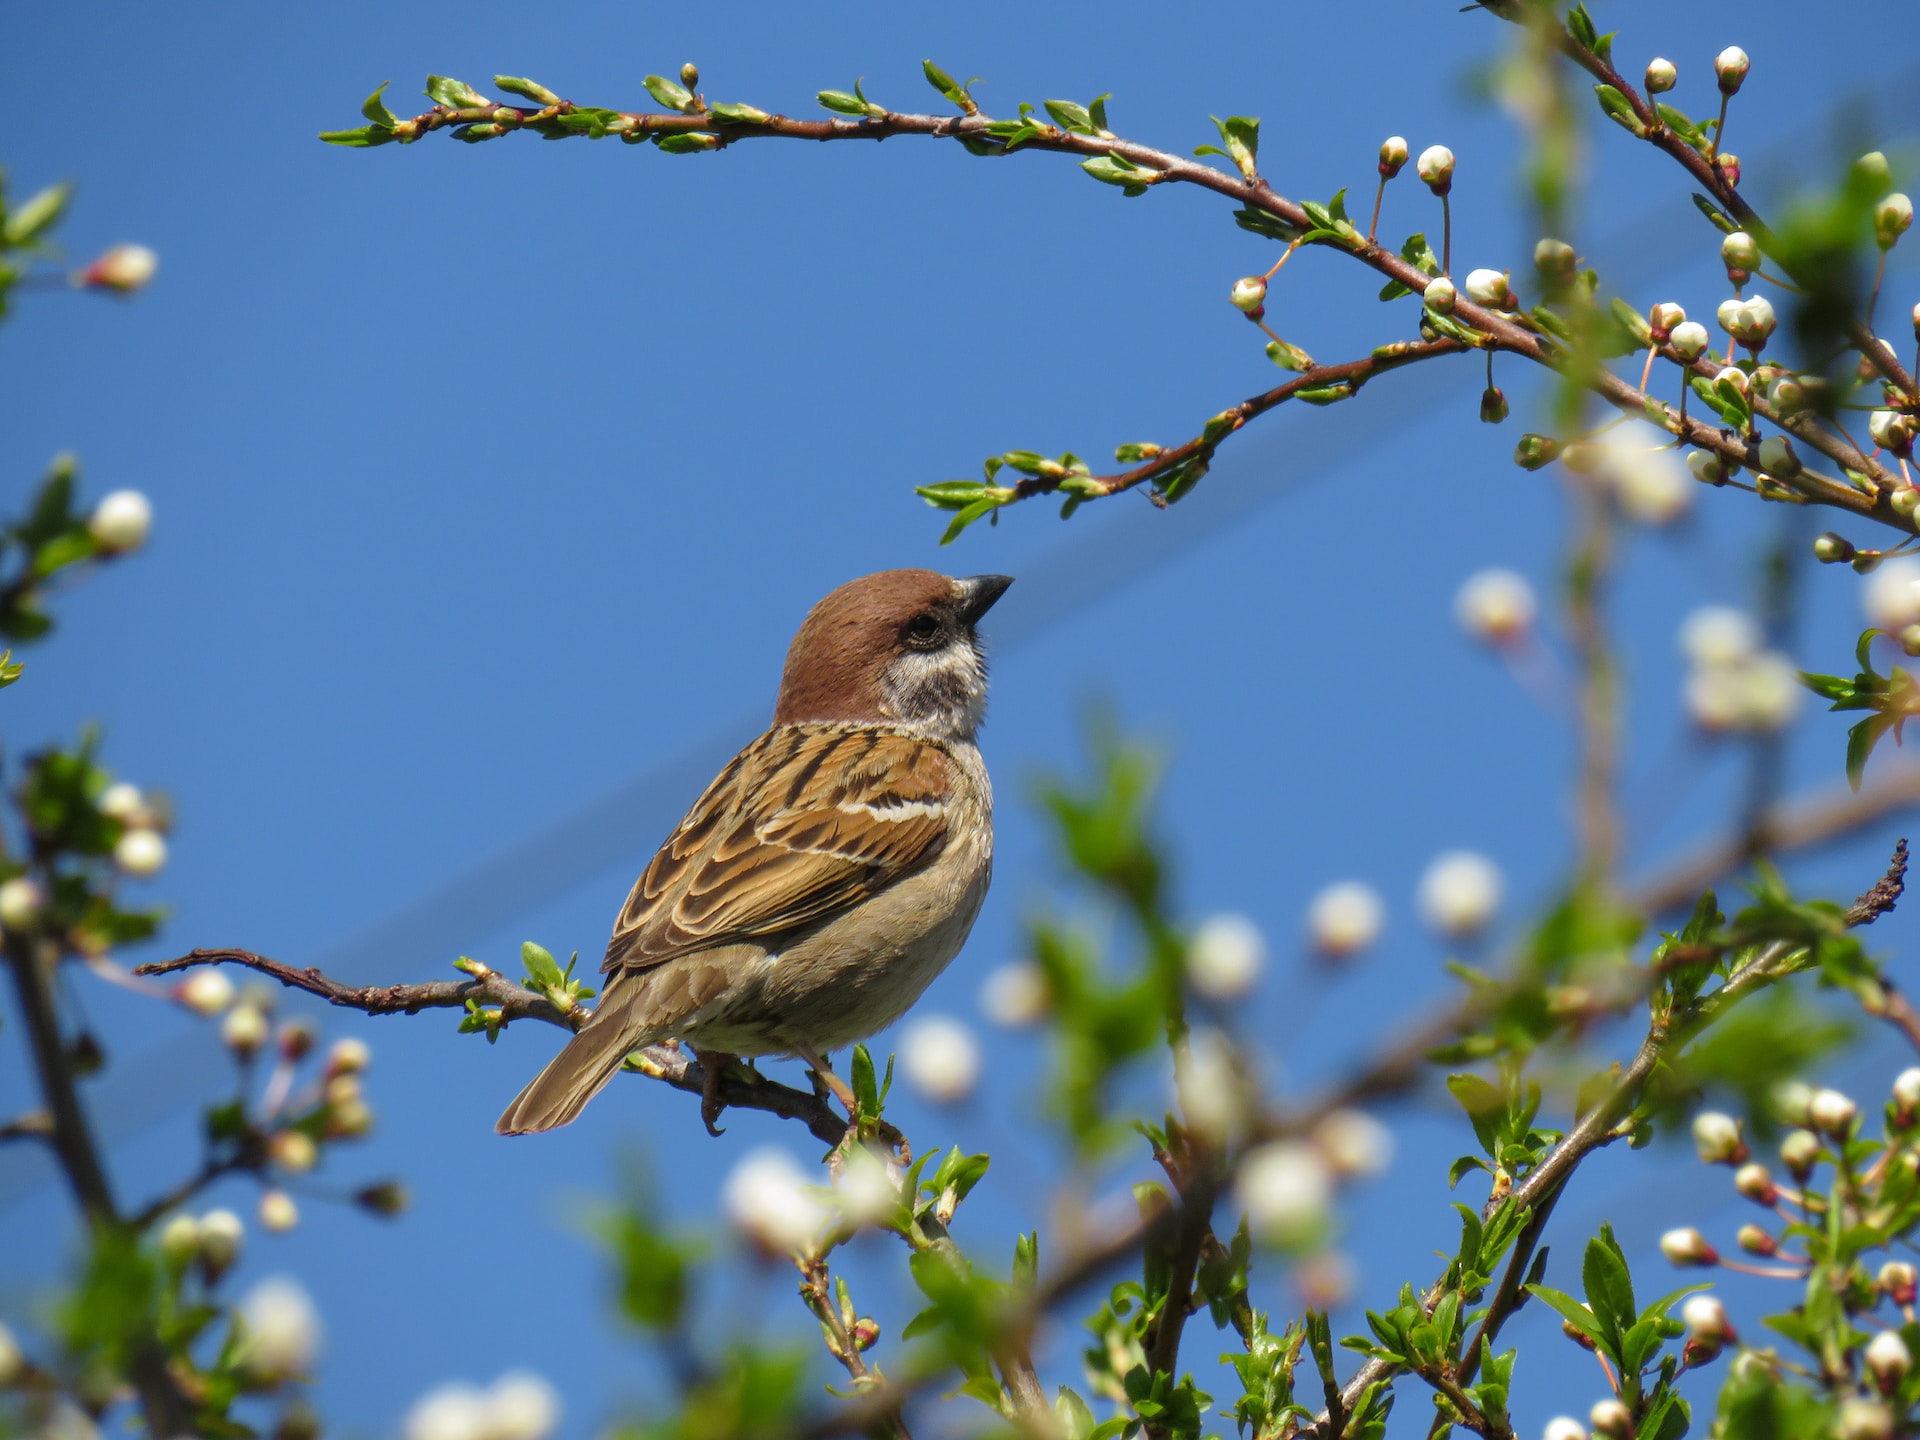 How To Kill Sparrows - Effective Methods For Sparrow Control